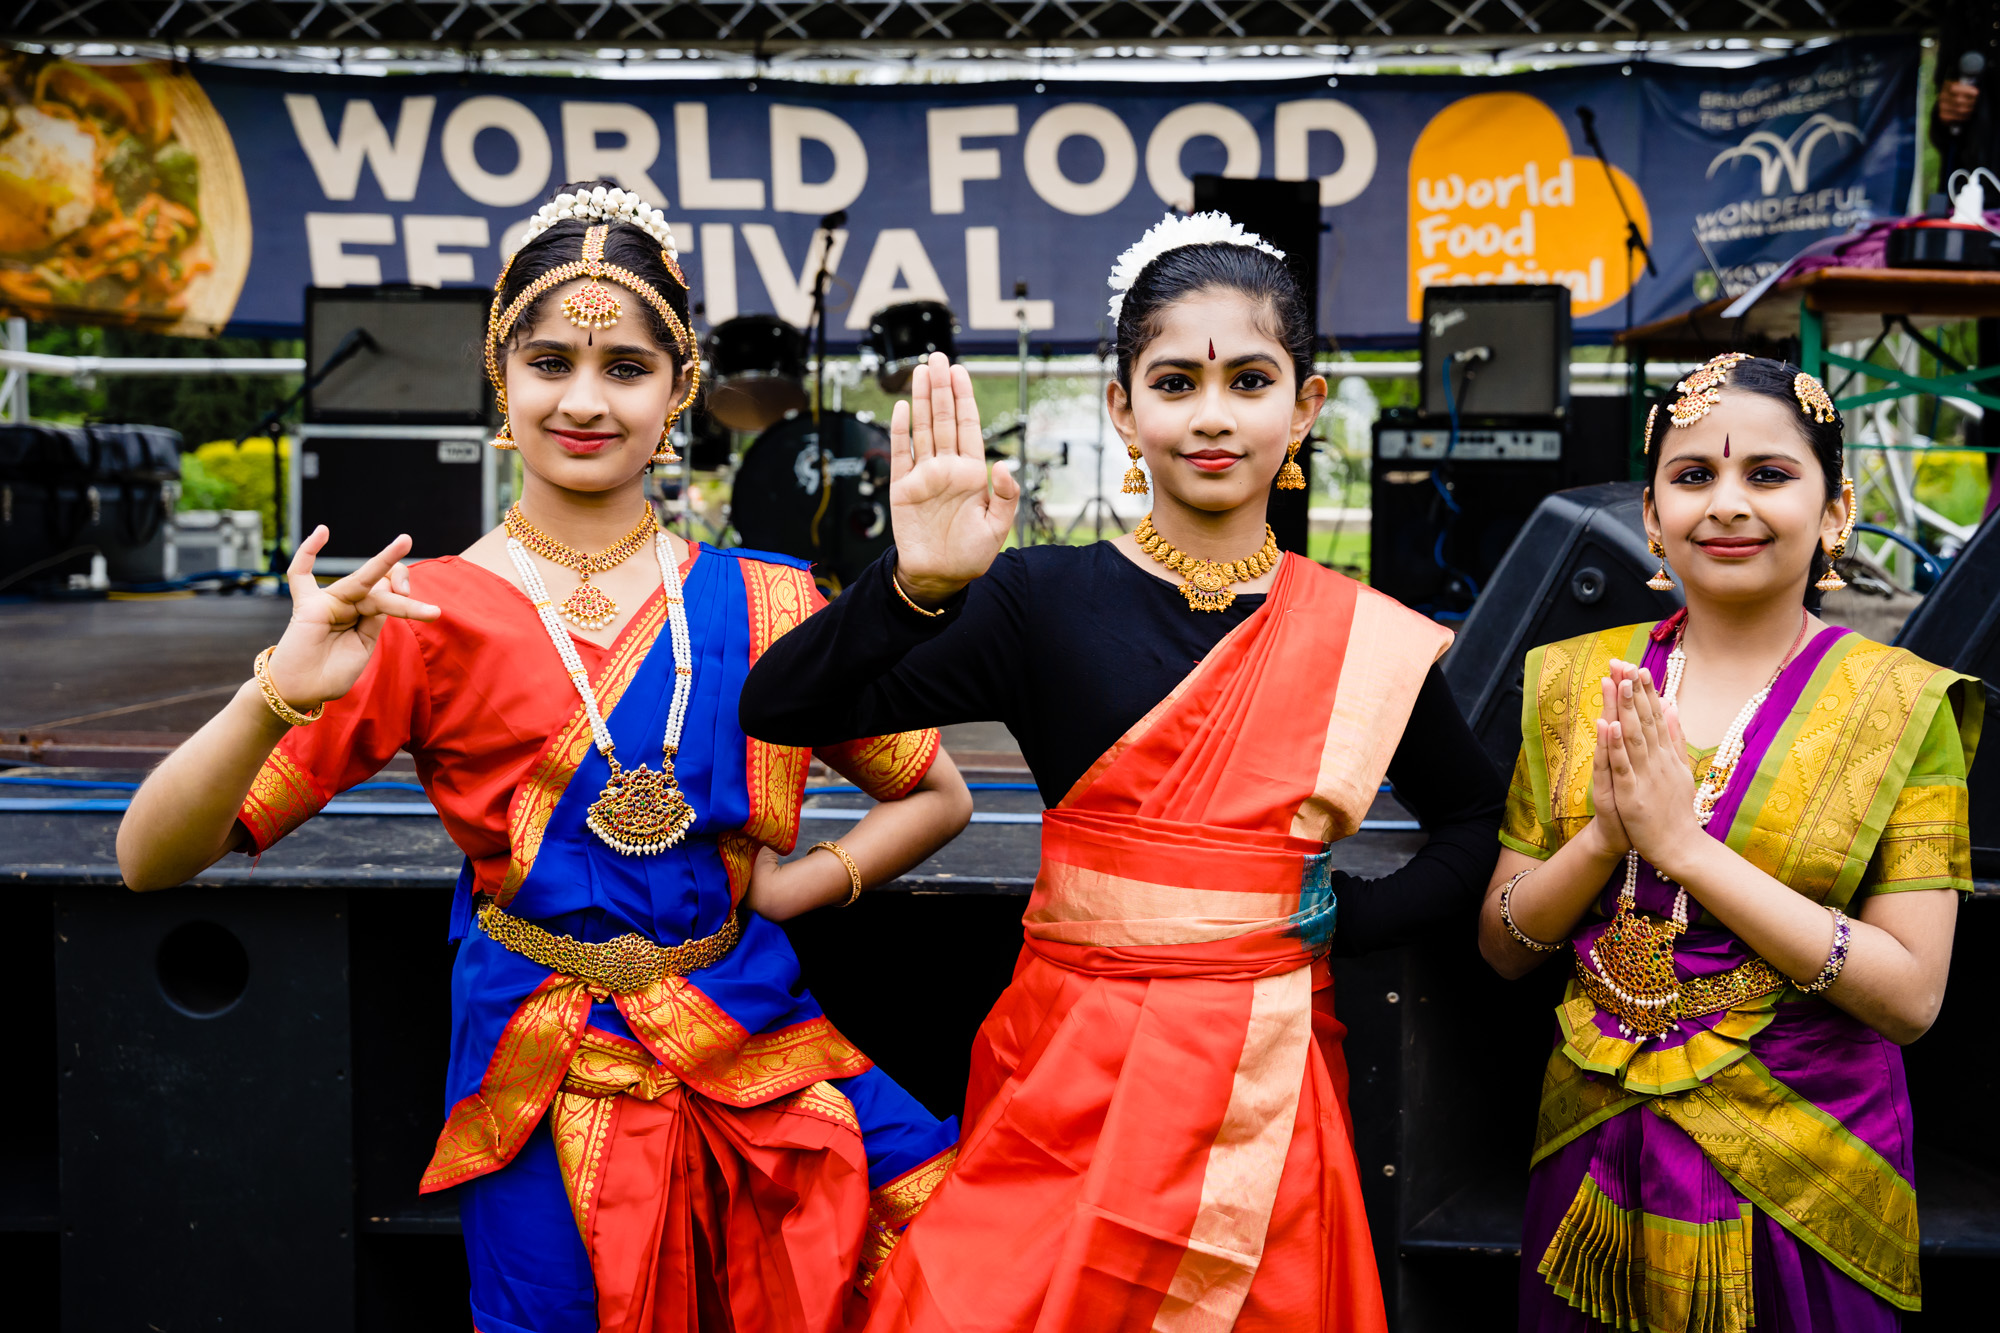 Indian dancers wearing sarees at the World Food Festival